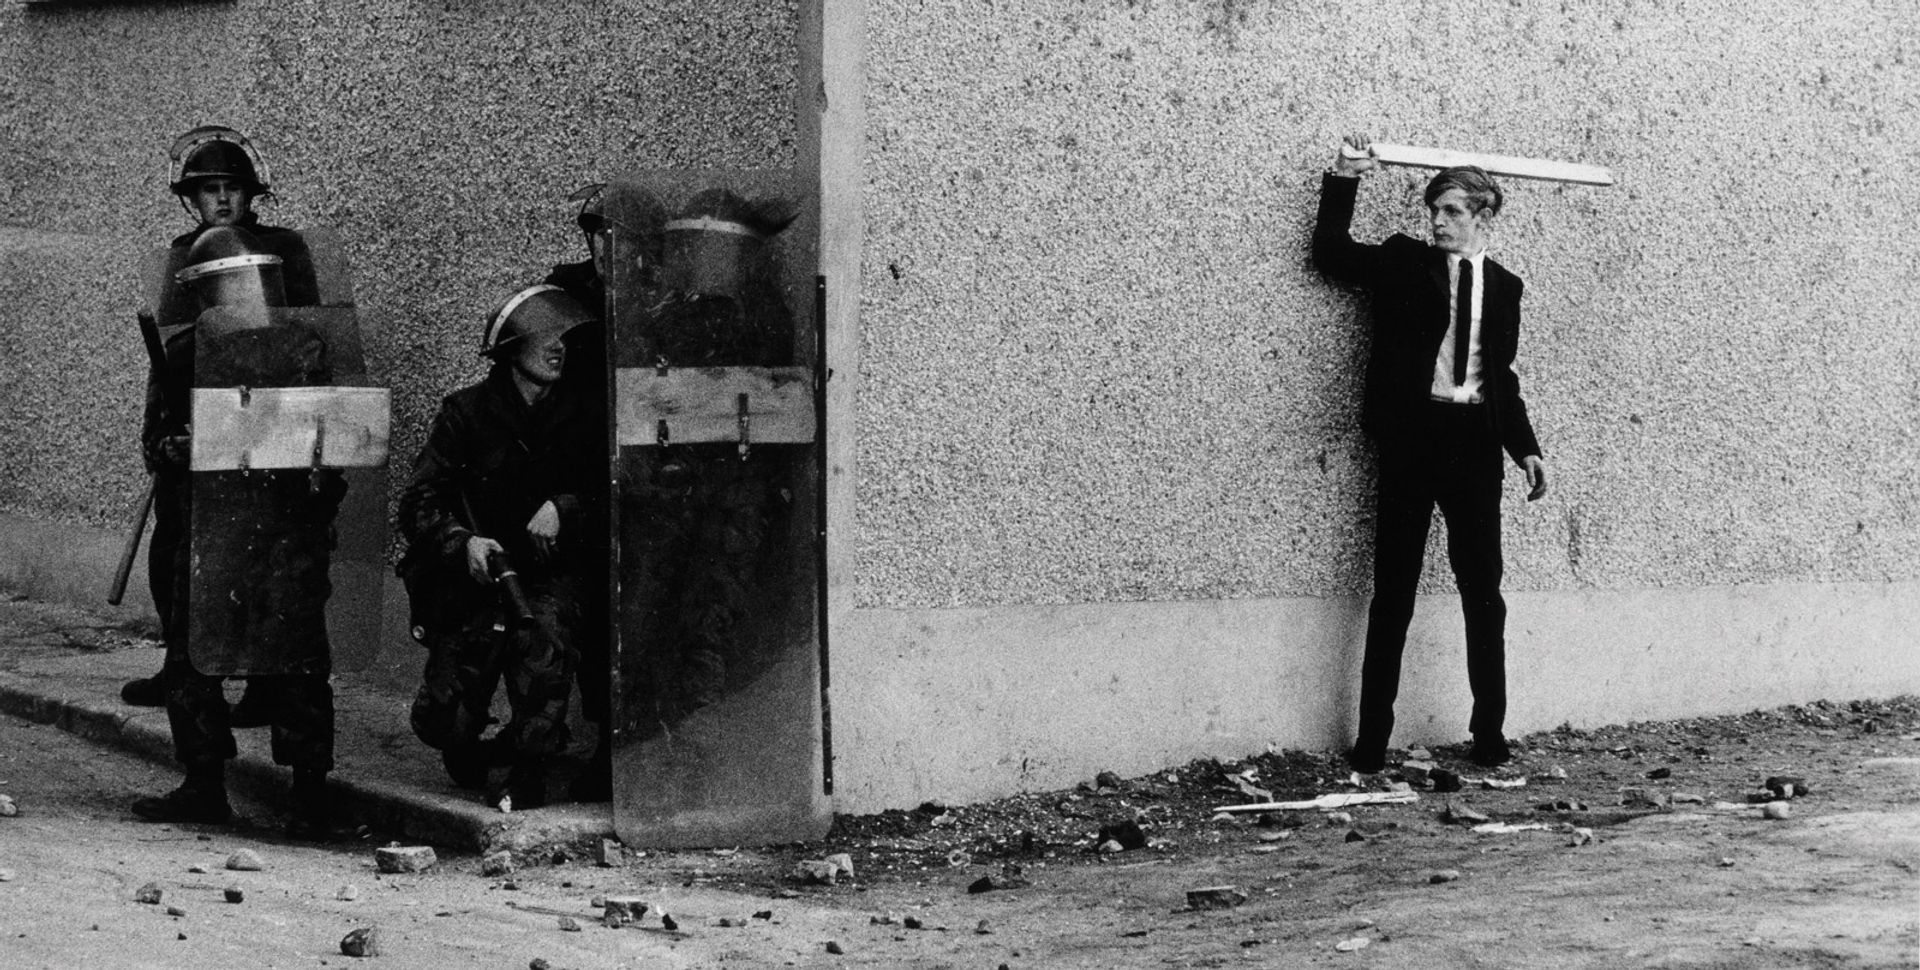 Catholic youths attacking British soliders in the bogside of Londonderry (1971) © Dom McCullin